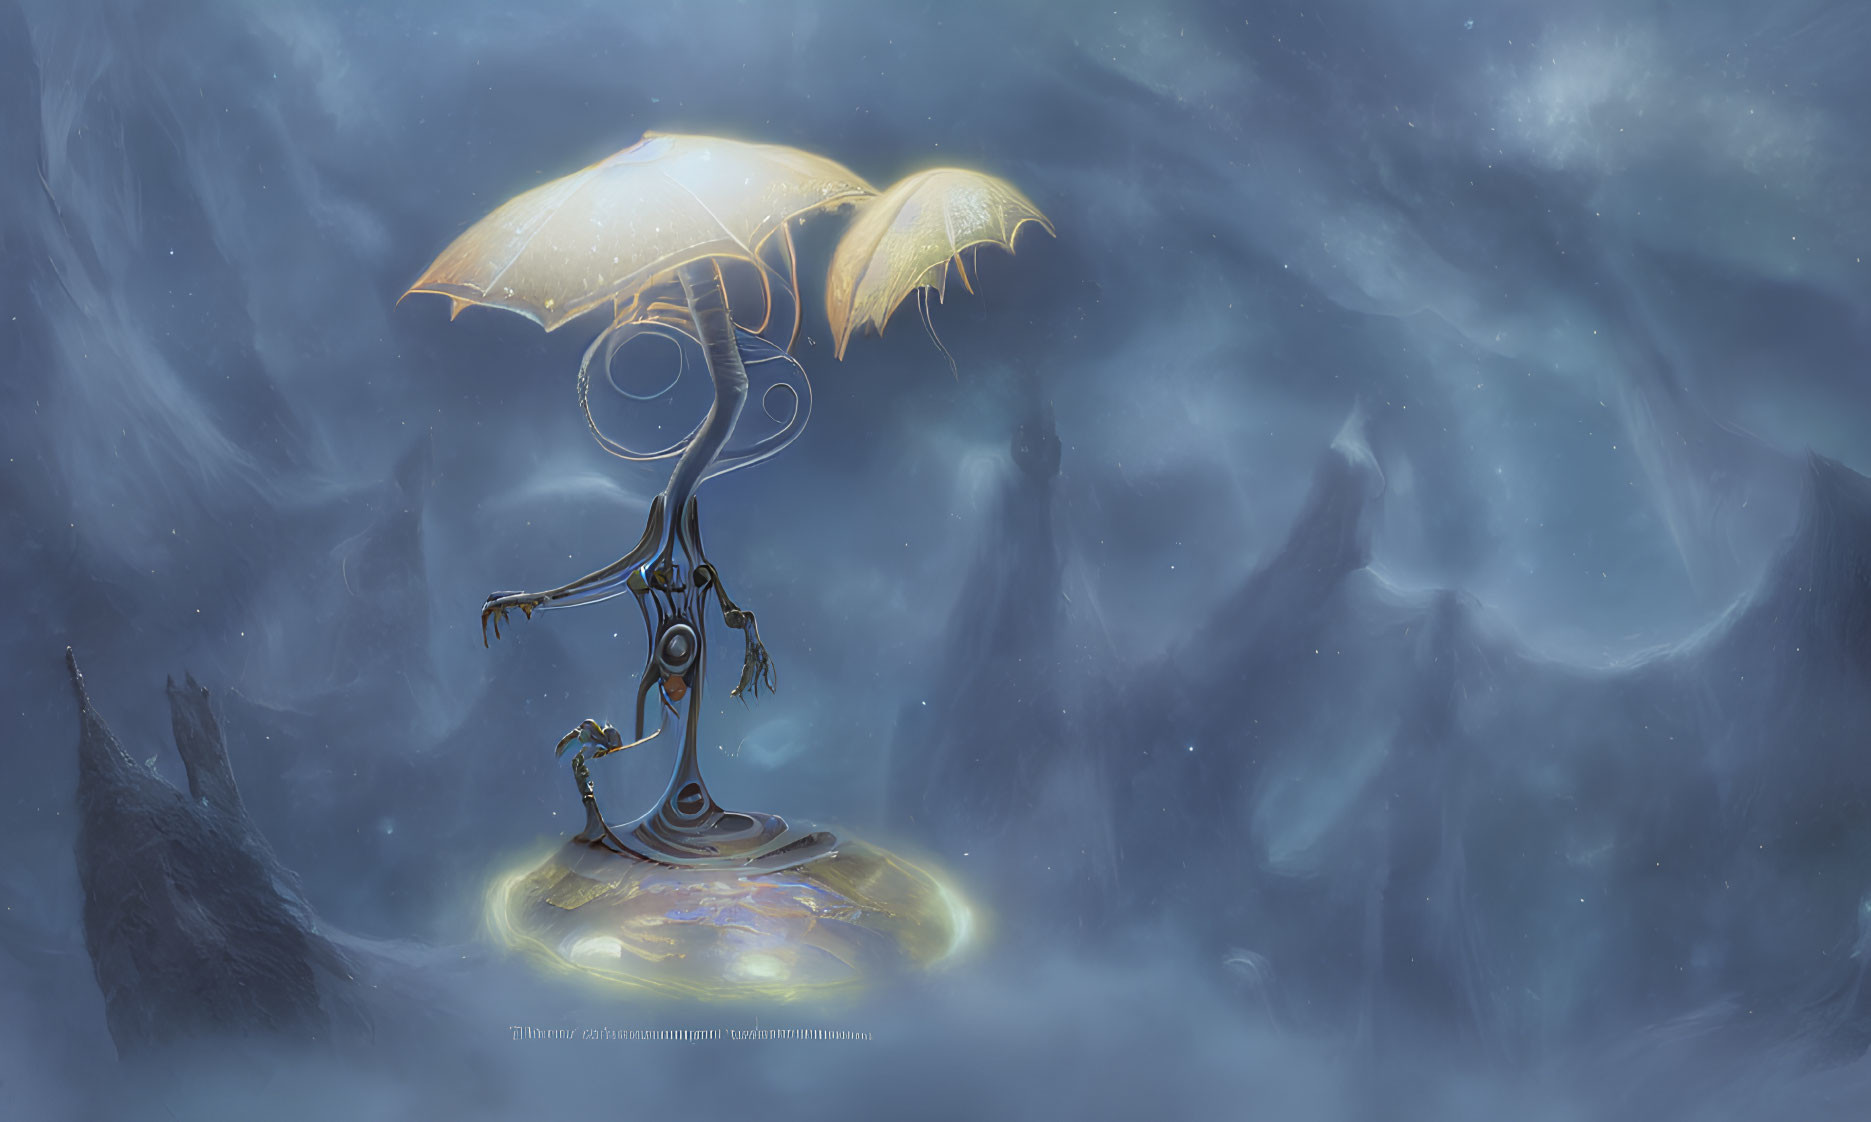 Stylized robotic figure with umbrella in misty blue landscape